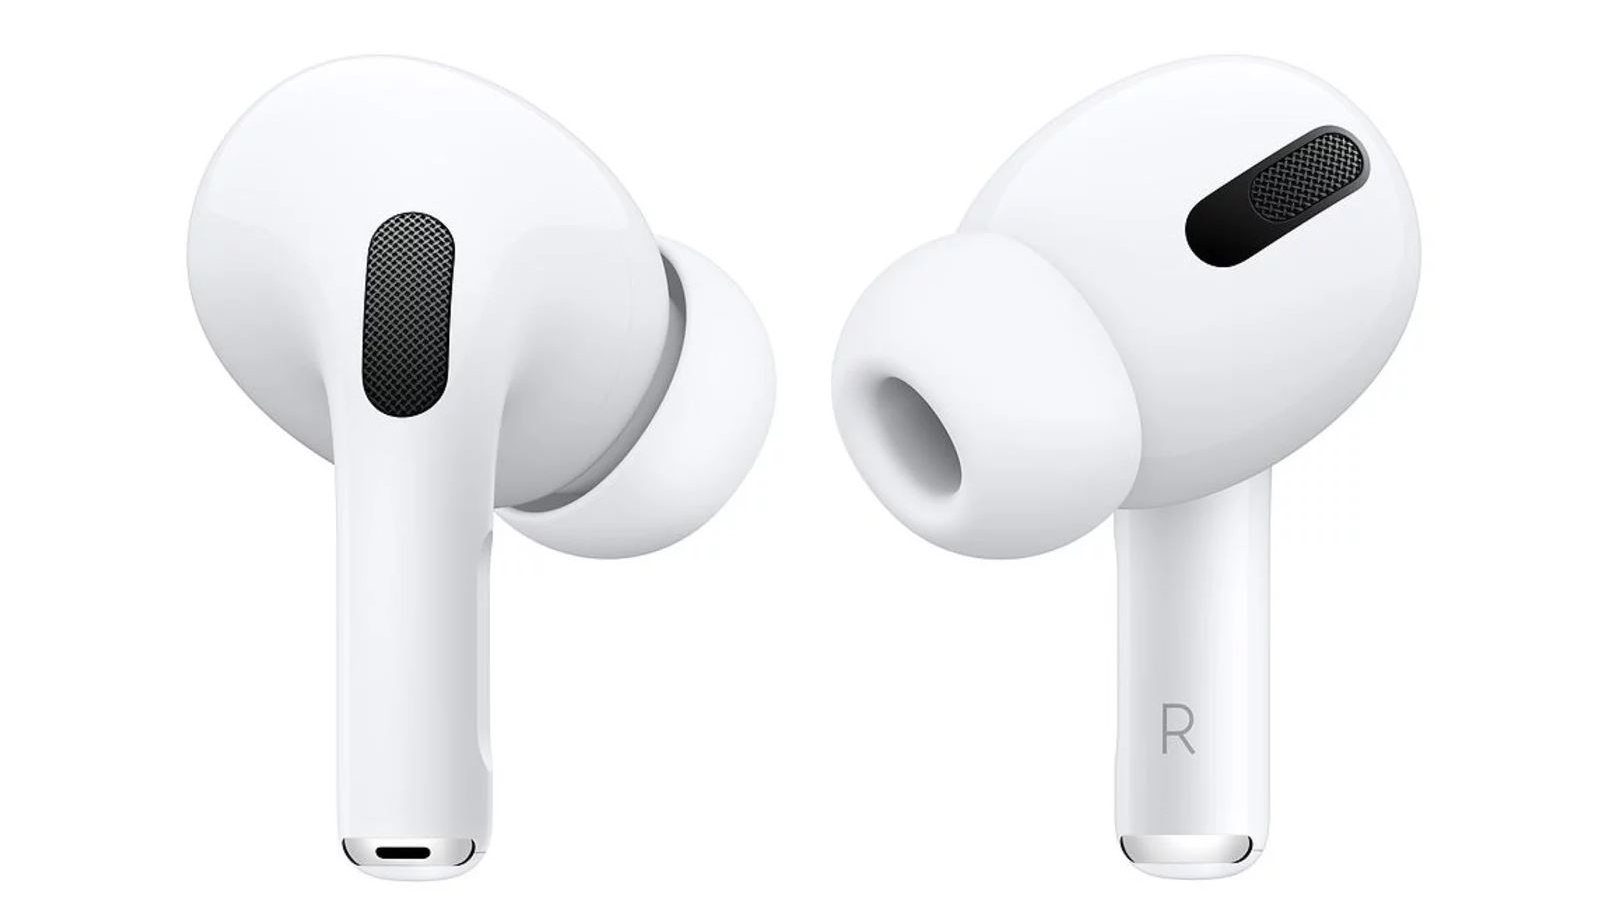 The Airpods pro